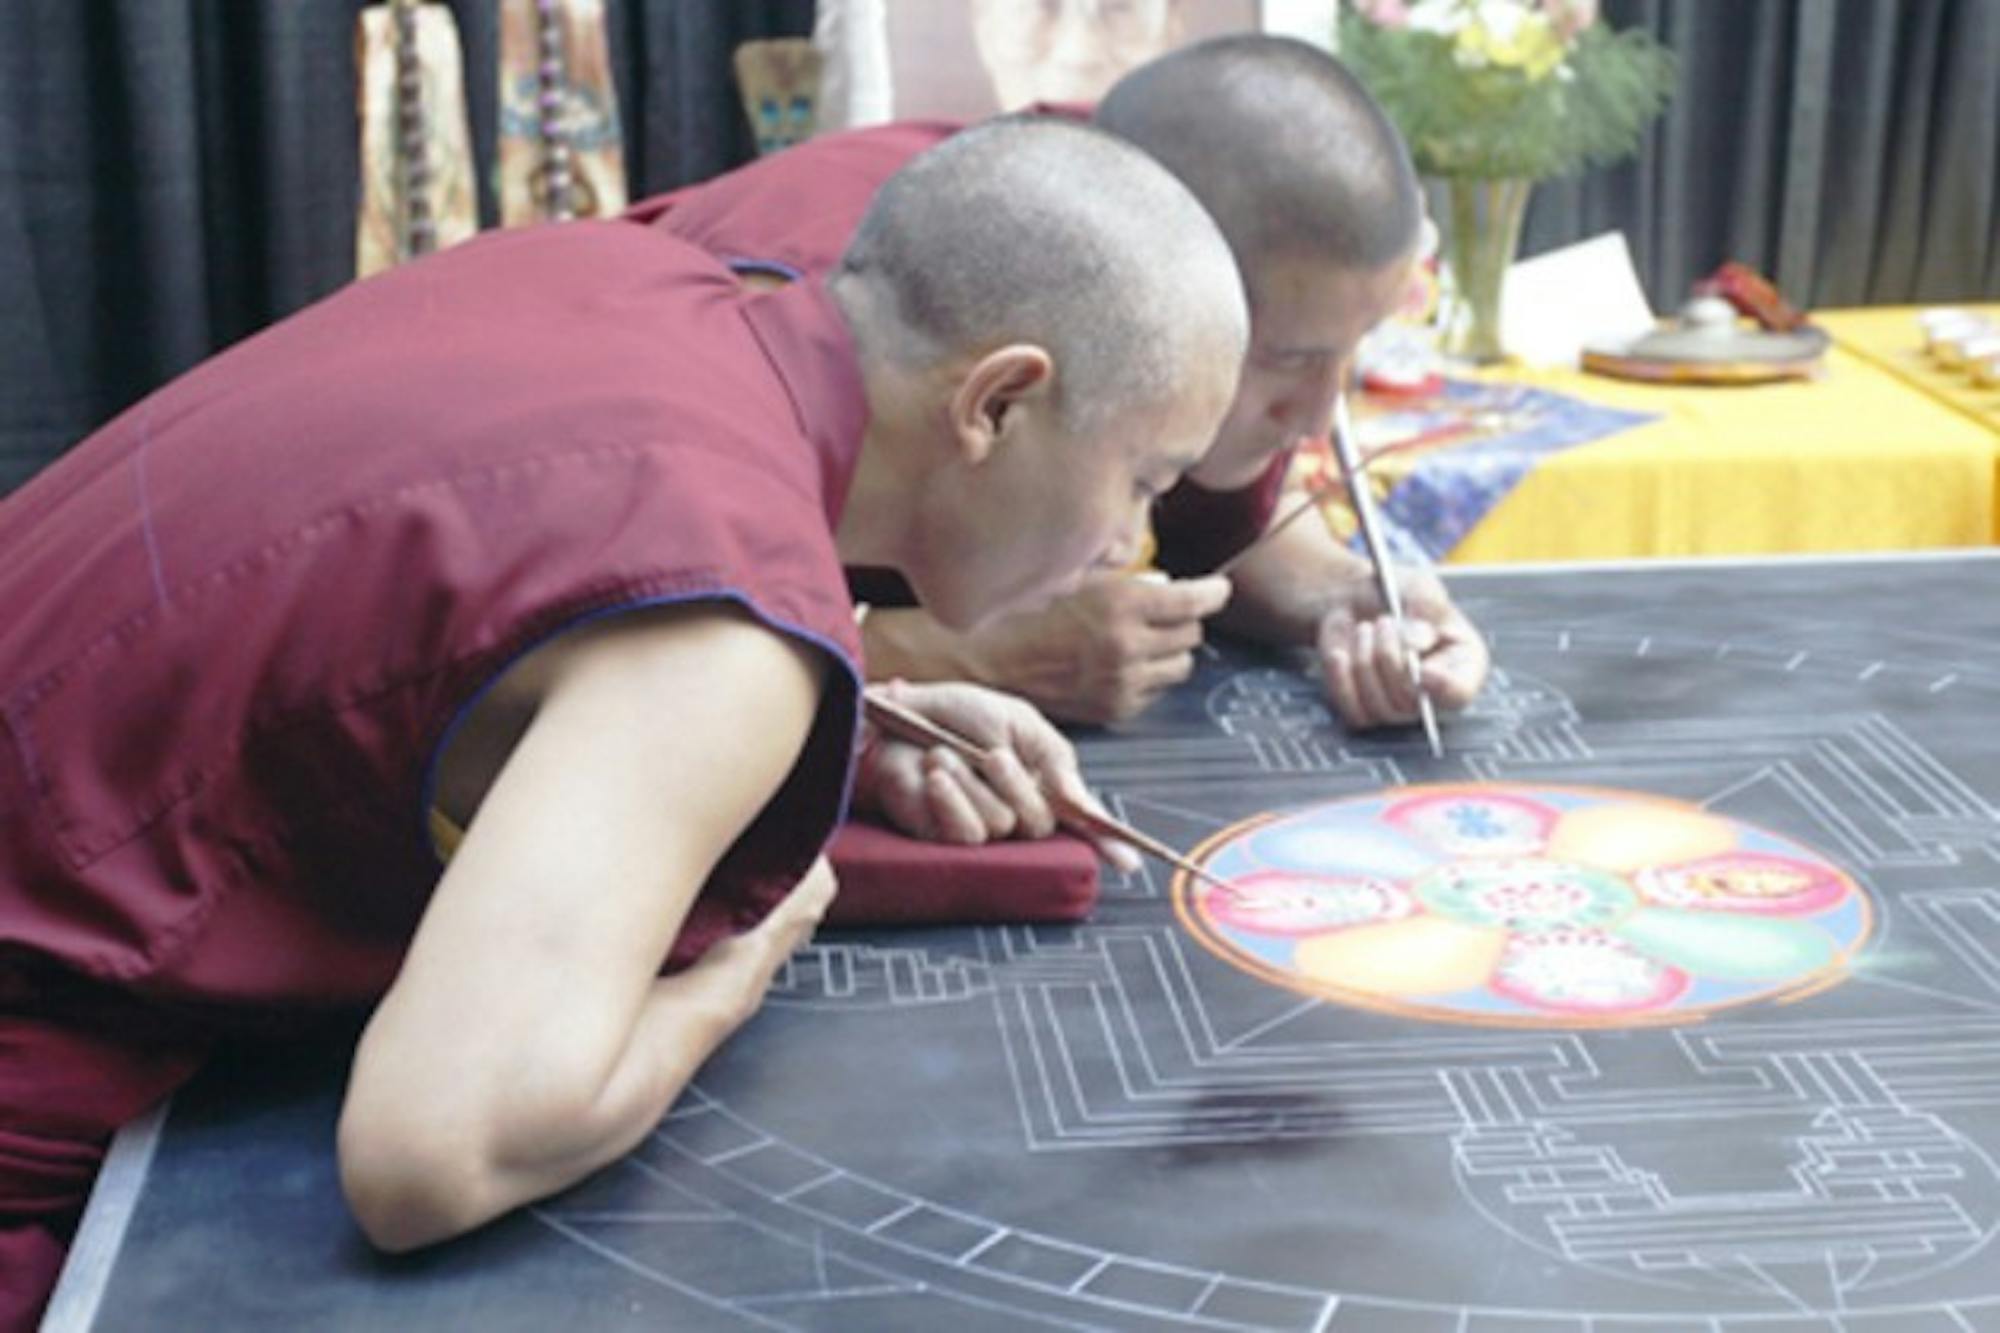 The mandala, which the monks ultimately released into the Connecticut River, is used to symbolize the transitory nature of material things and is a reminder of the discipline associated with Buddhism.